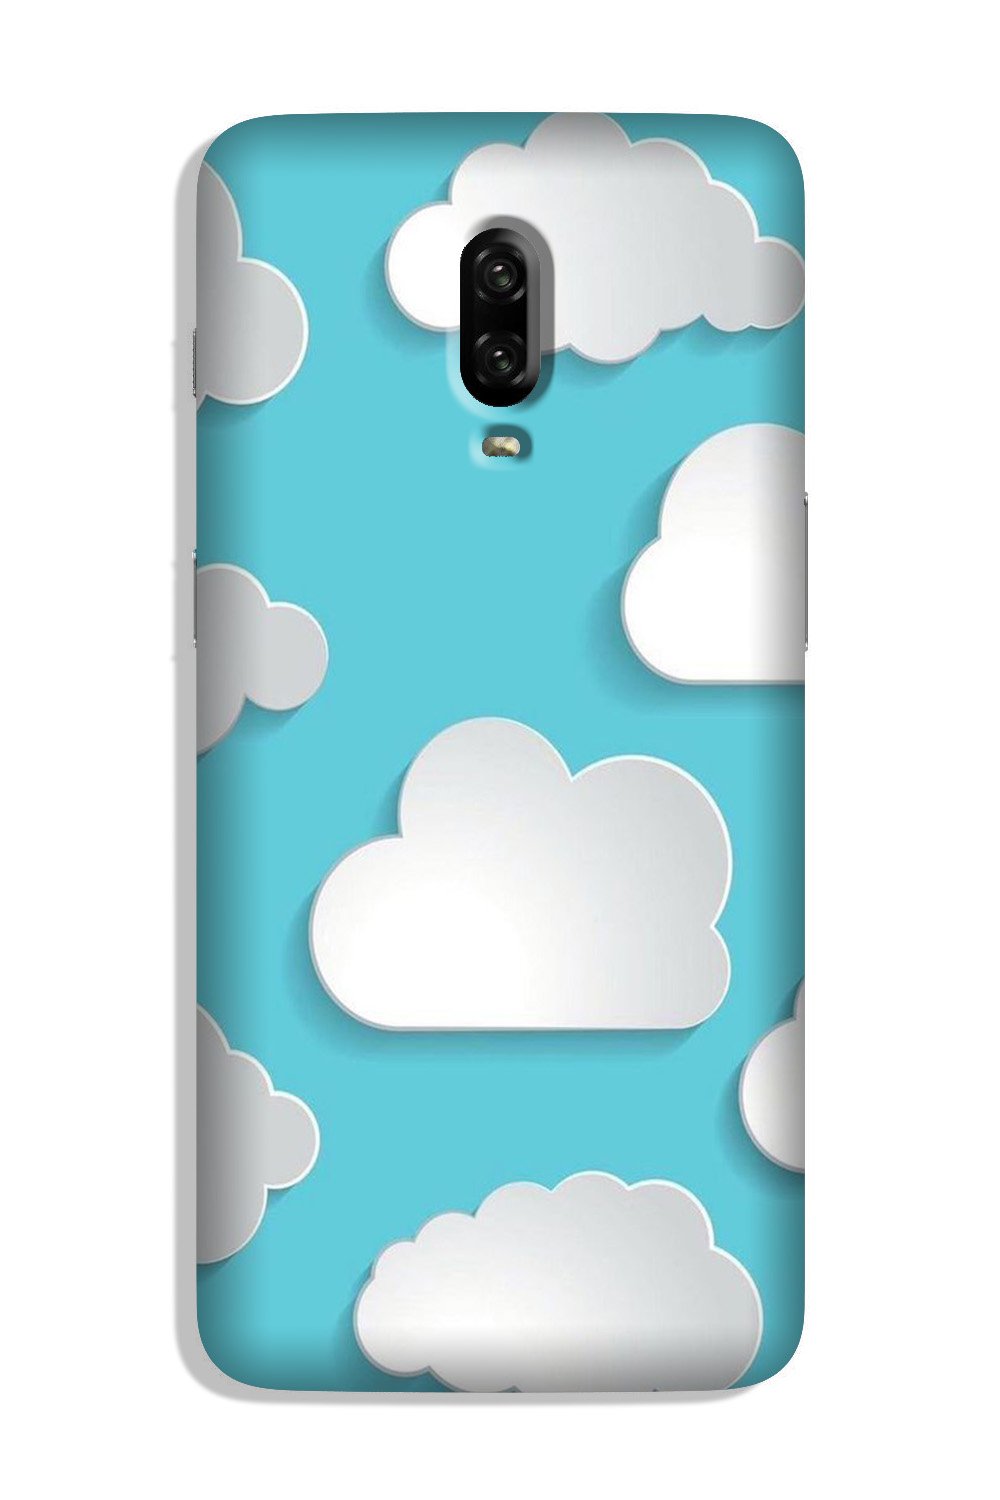 Clouds Case for OnePlus 7 (Design No. 210)